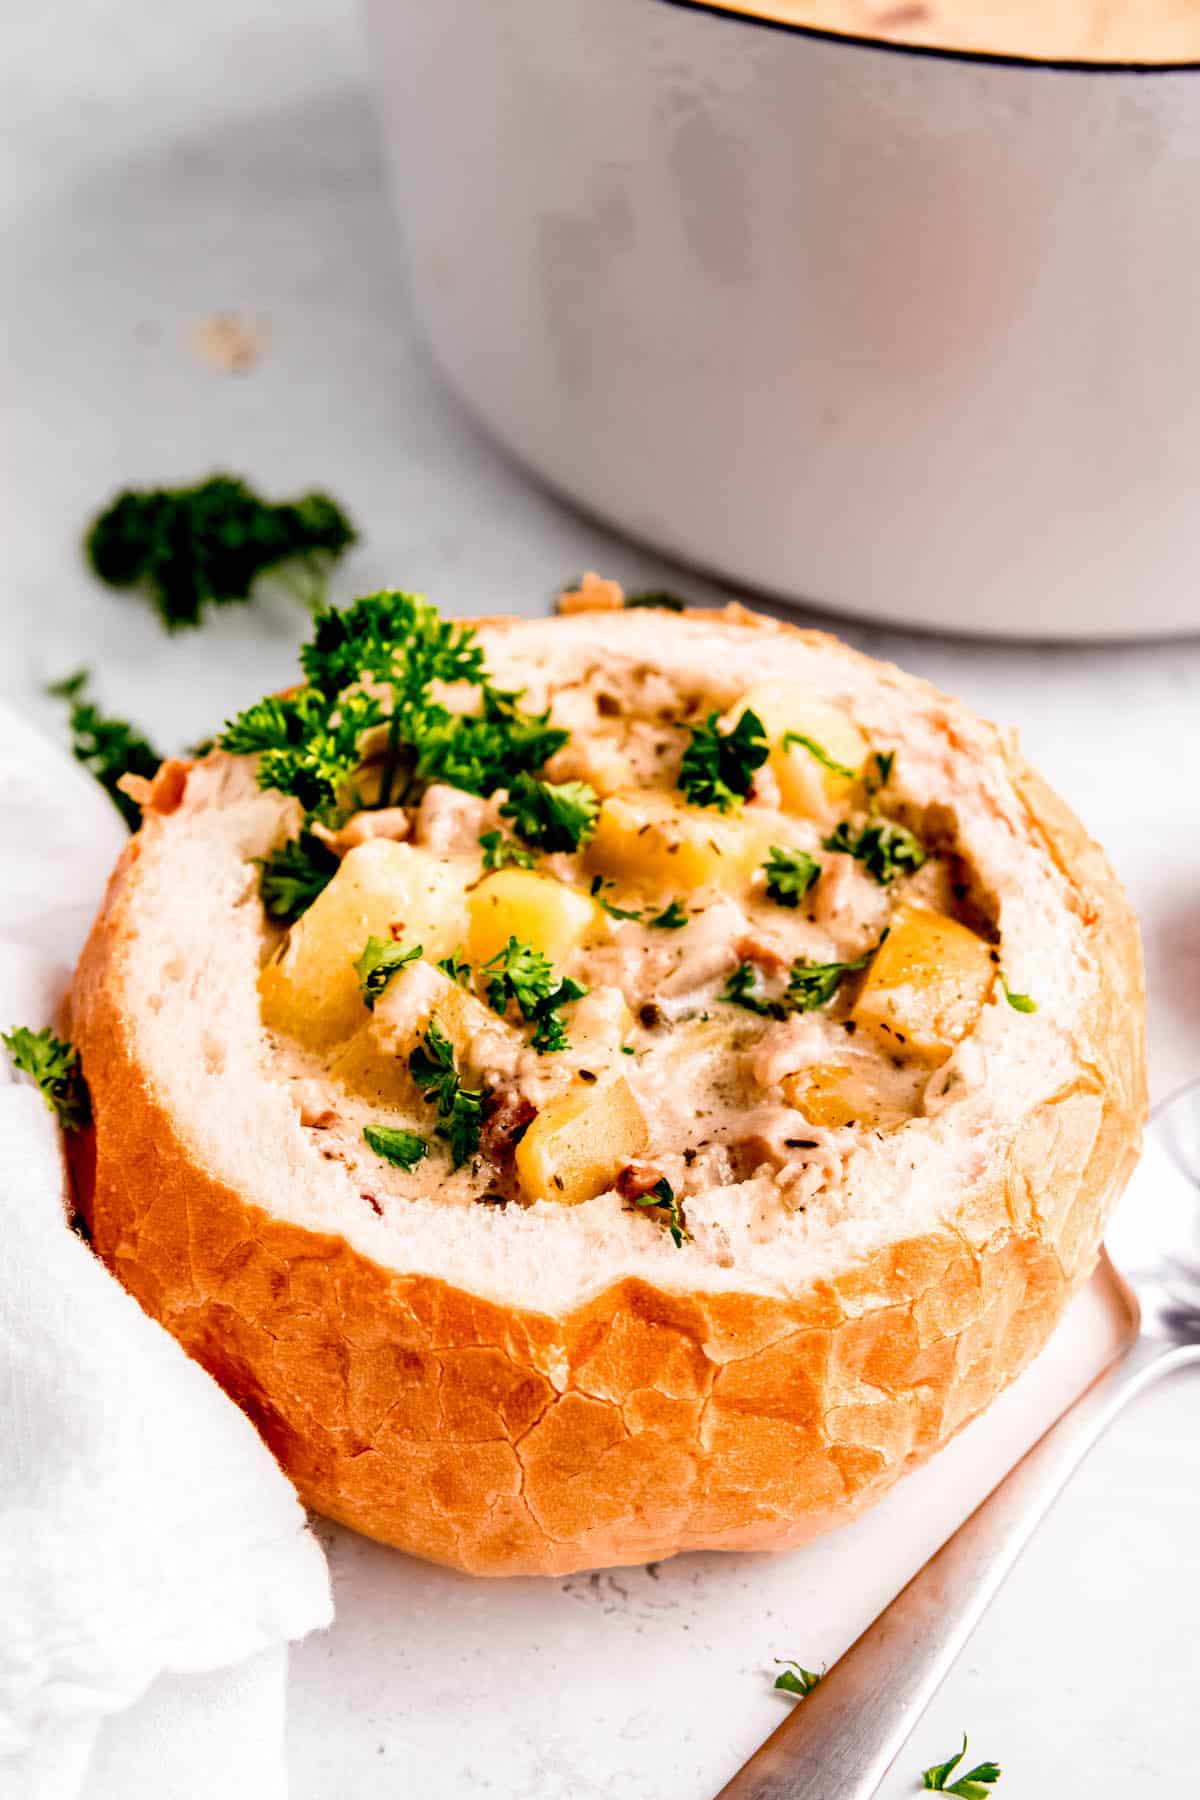 crusty bread bowl filled with chunky gluten-free clam chowder garnished with parsley.